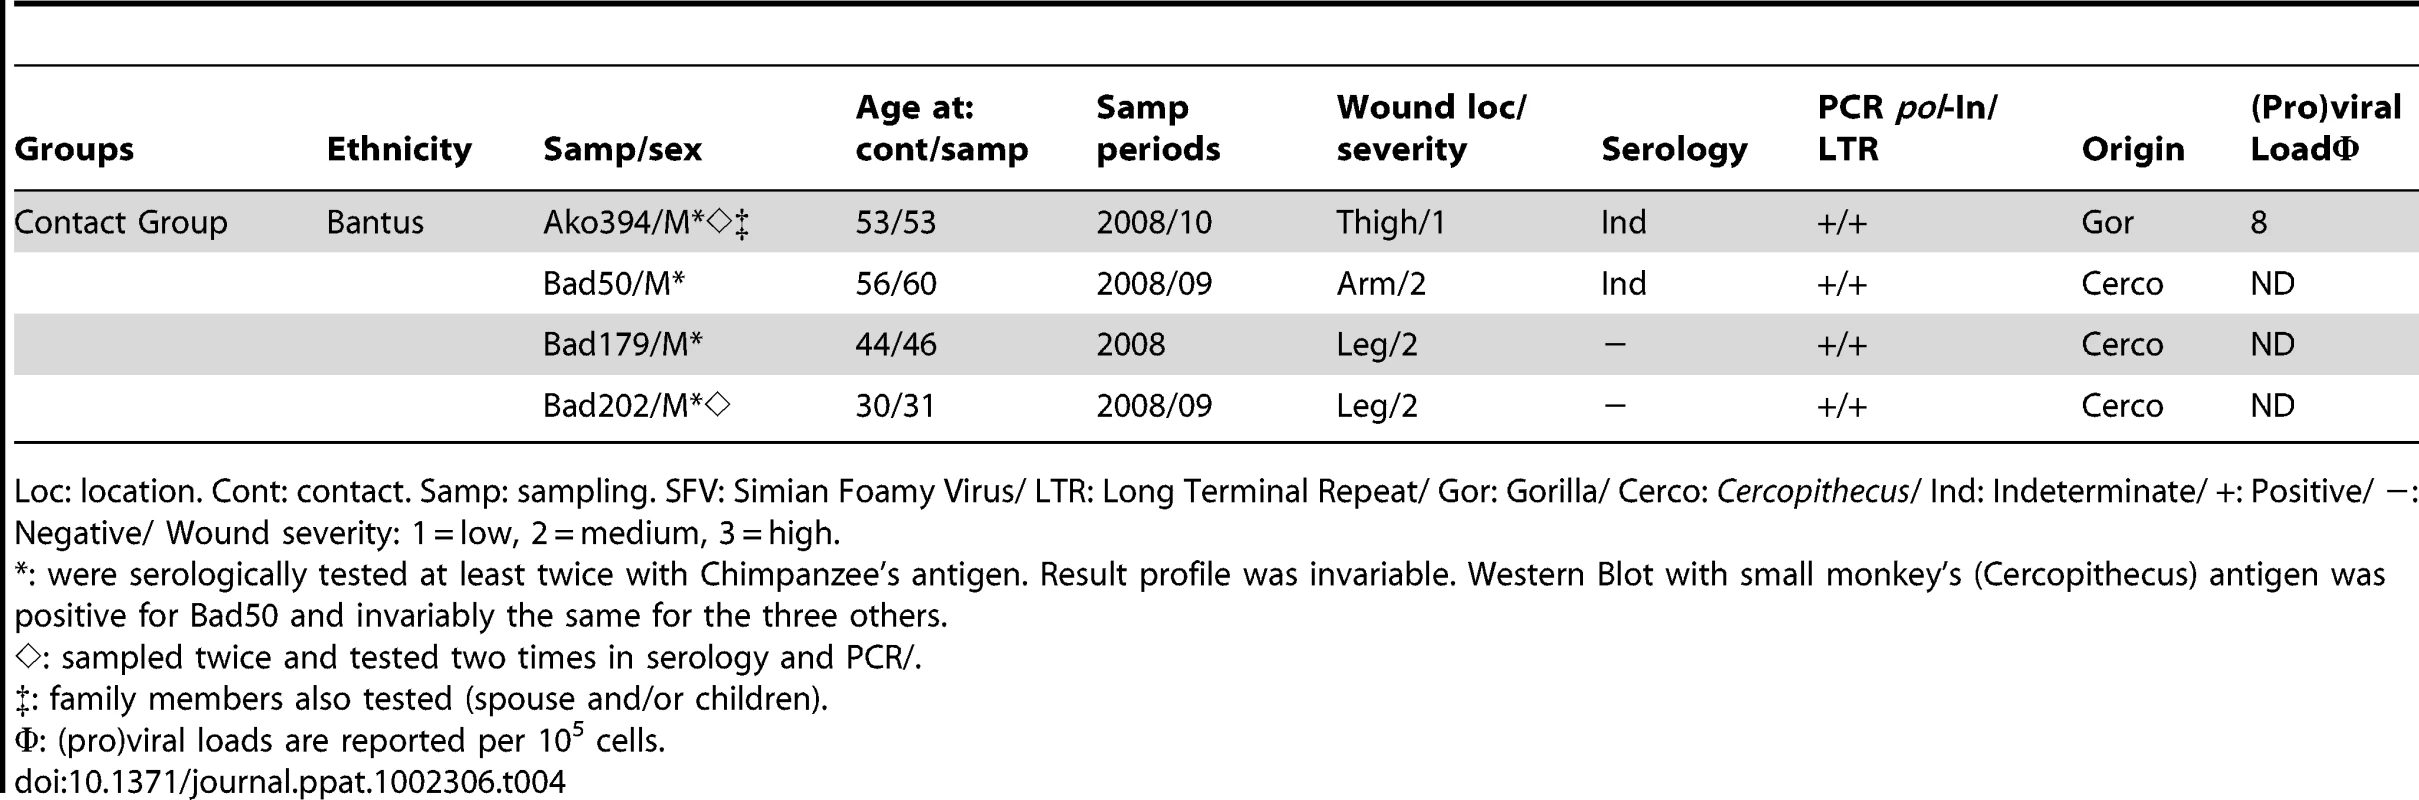 Epidemiological and “non-classical” biological features of SFV infected humans in contact group.